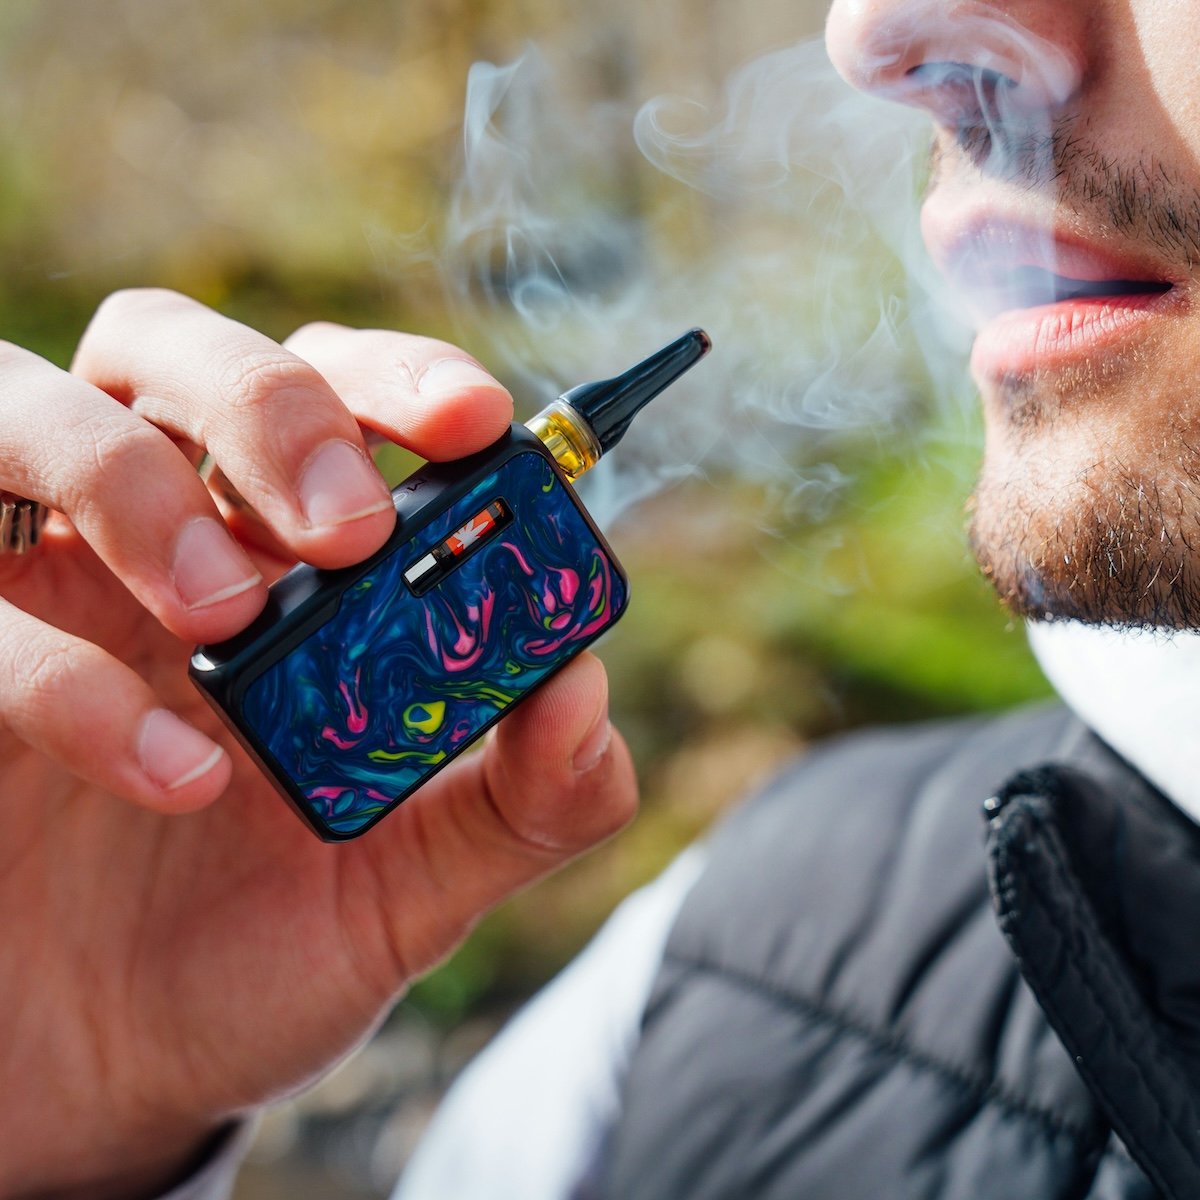 Close-up product shot of a person vaping as an example of photography style